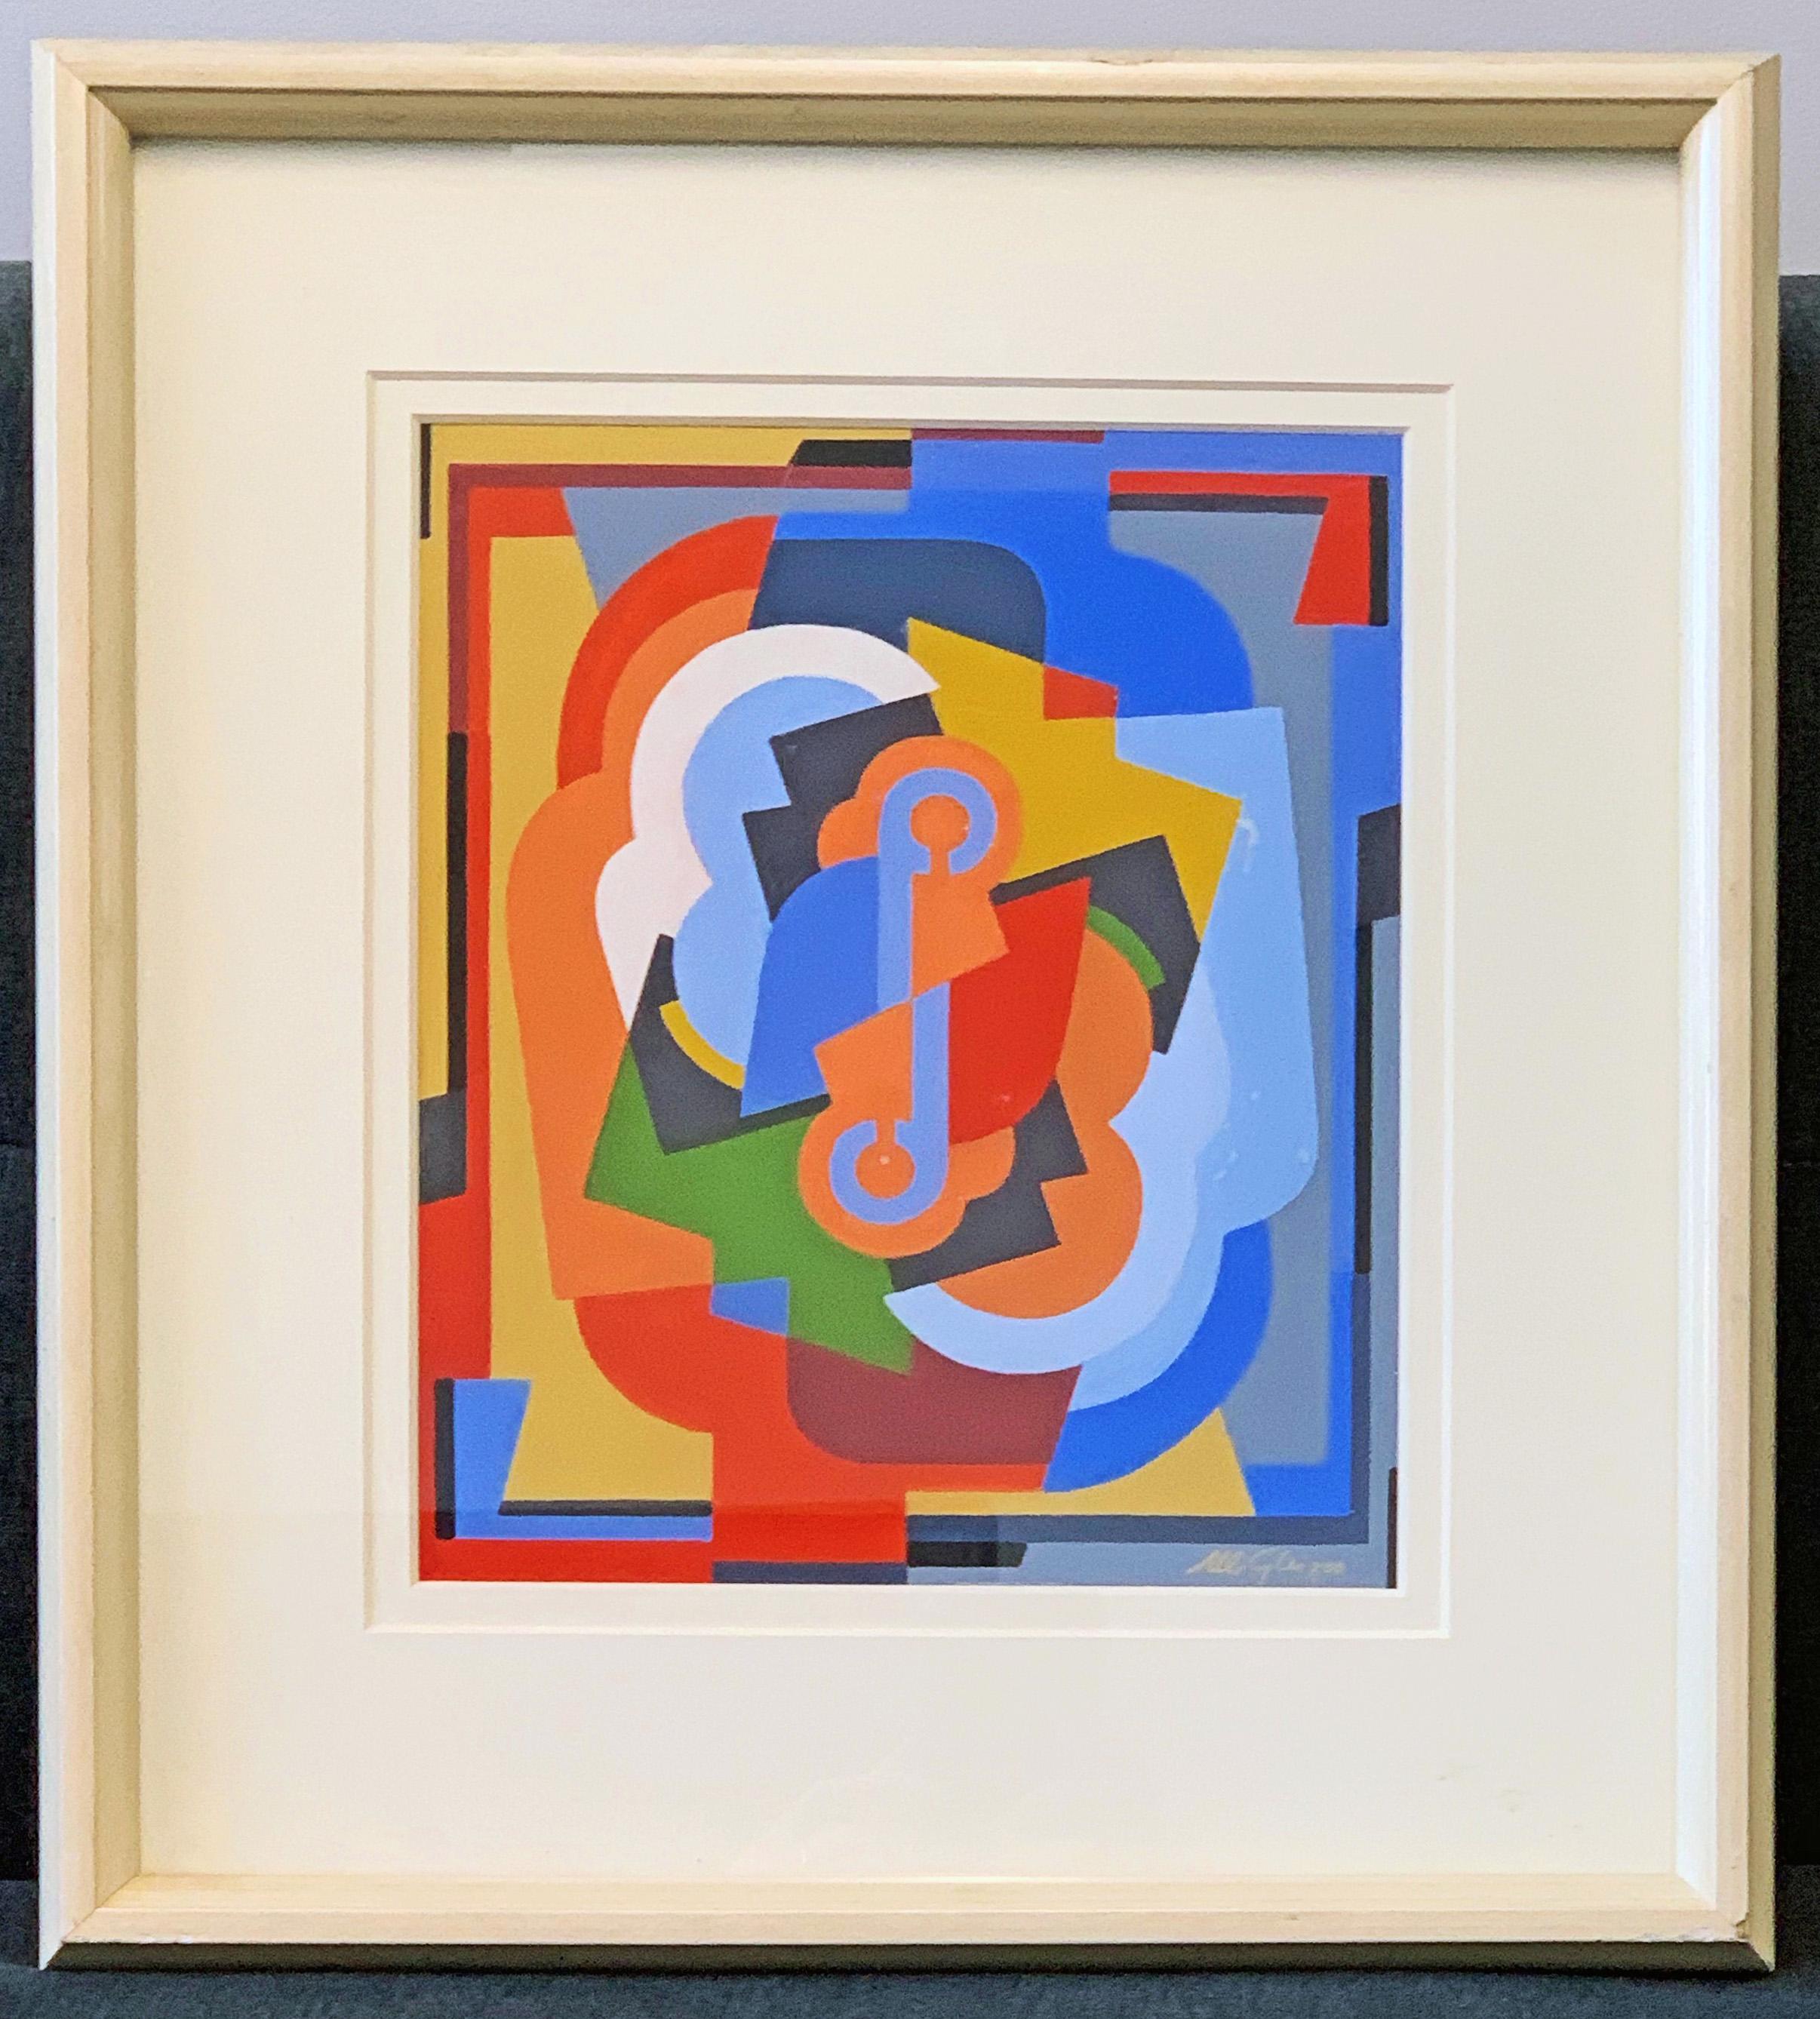 One of the most brilliantly-hued paintings by Albert Gleizes we have seen, this highly abstract Cubist work is a rotating knot of curving forms in periwinkle, carmen, olive green, sky blue, burnt sienna and grey flannel, as vivid now as when it was